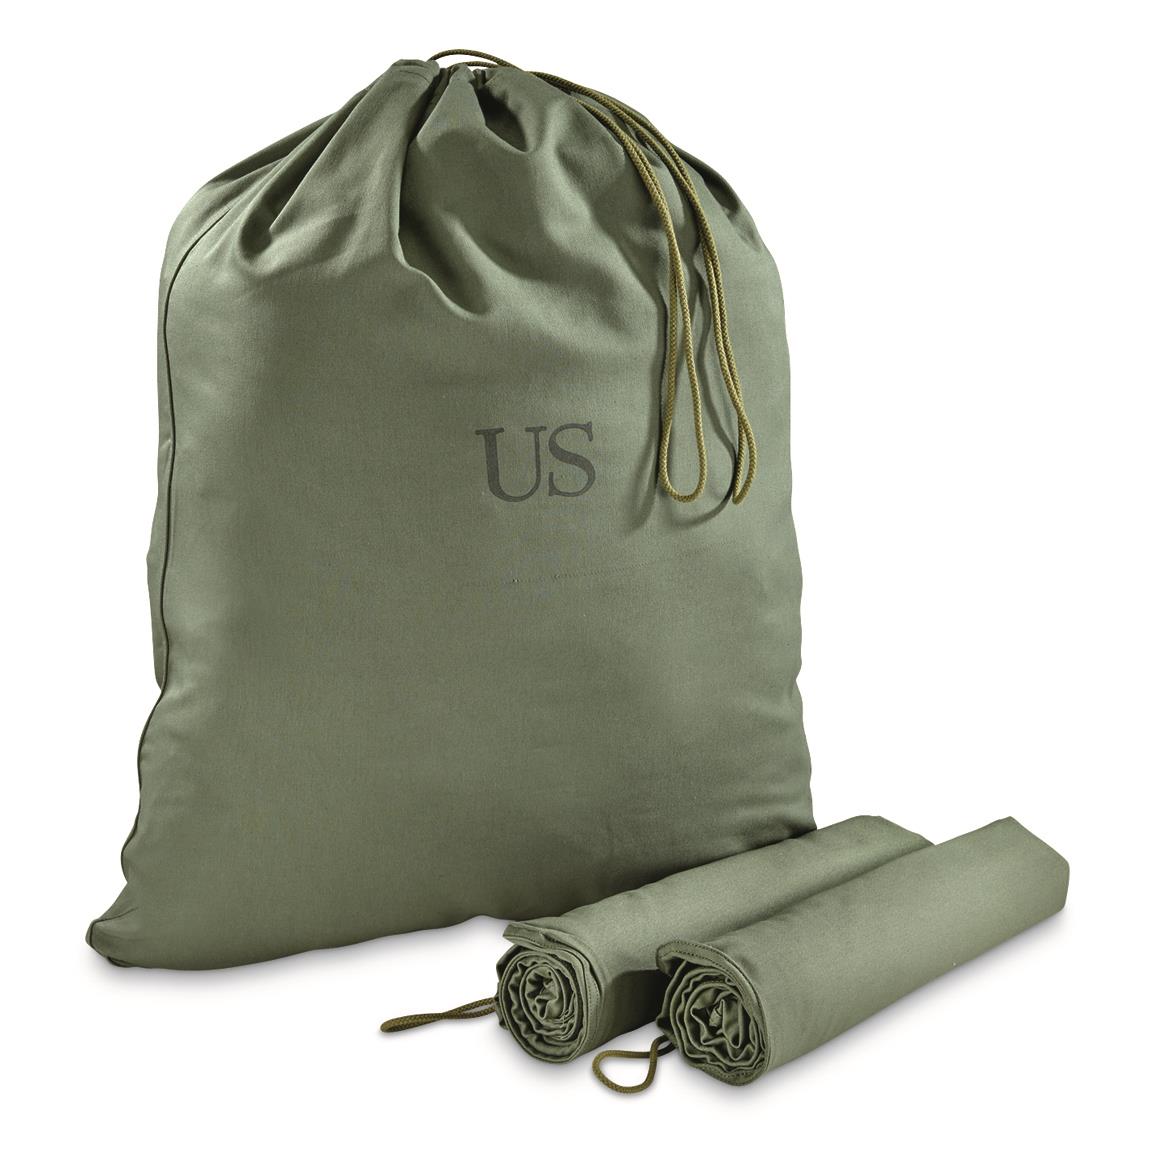 US Military Surplus Laundry Bag, OD Green, 3 Pack, New